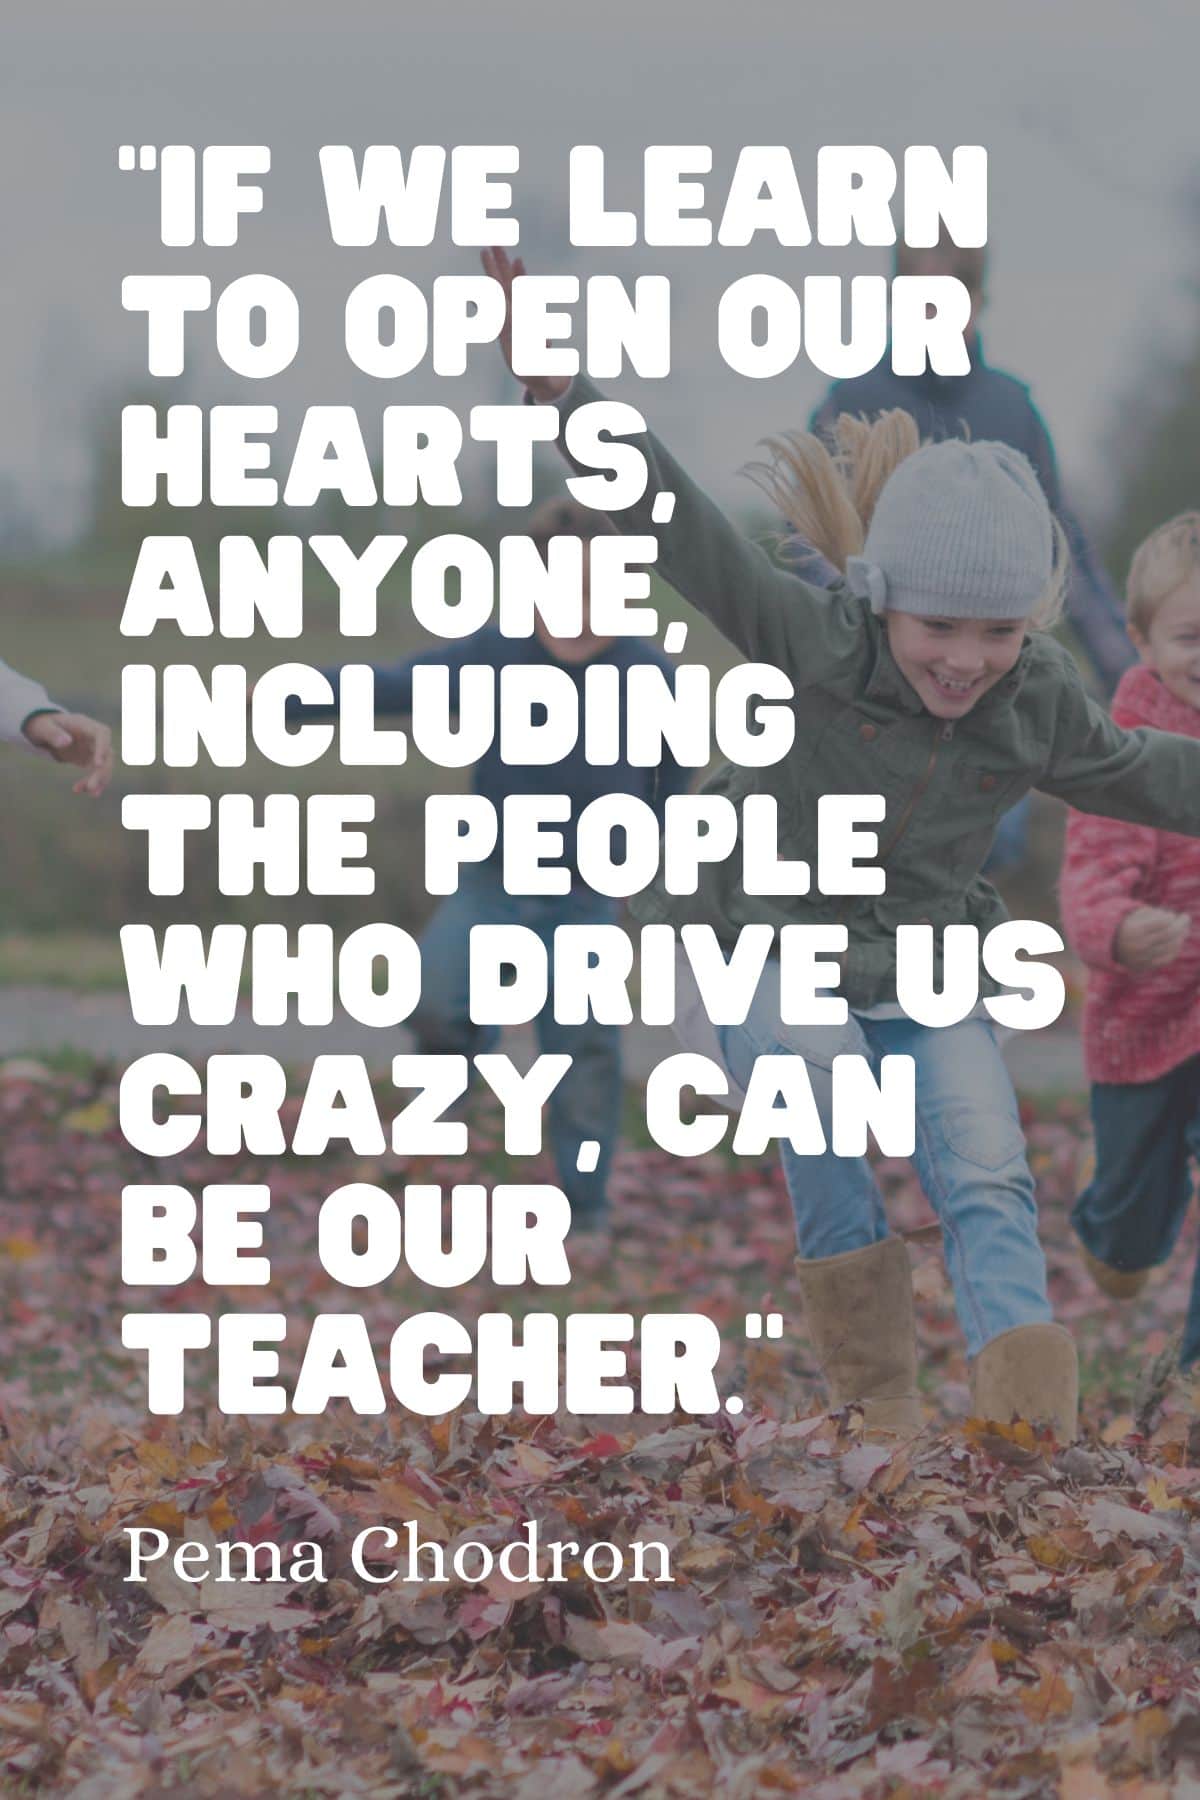 “If we learn to open our hearts, anyone, including the people who drive us crazy, can be our teacher.” - Pema Chödrön